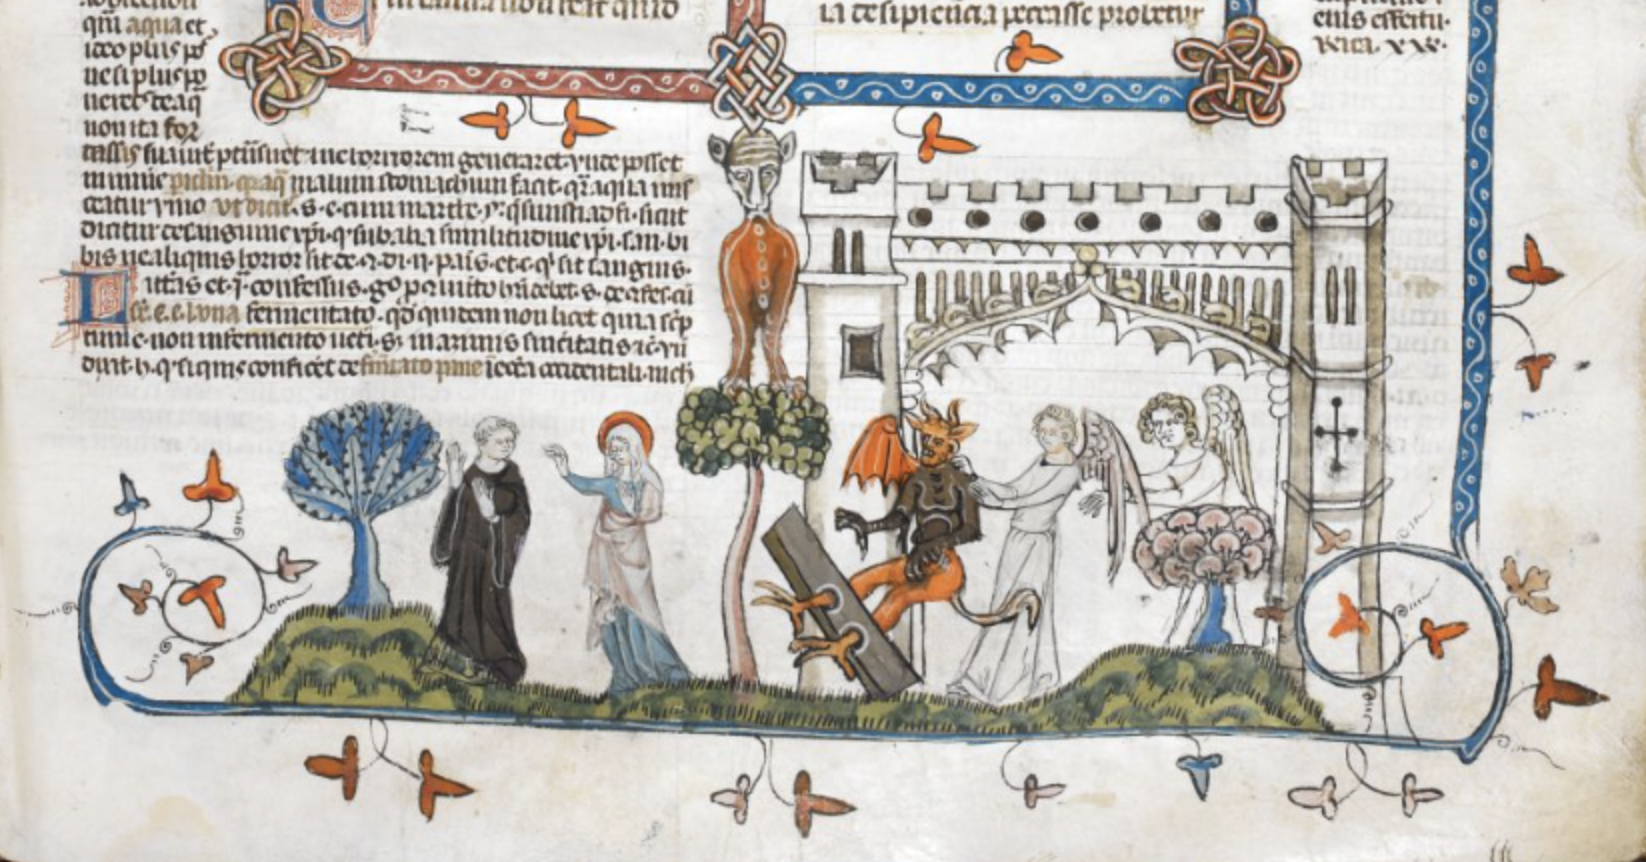 This illustrated manuscript, created in the first half of the 14th century, is known as 